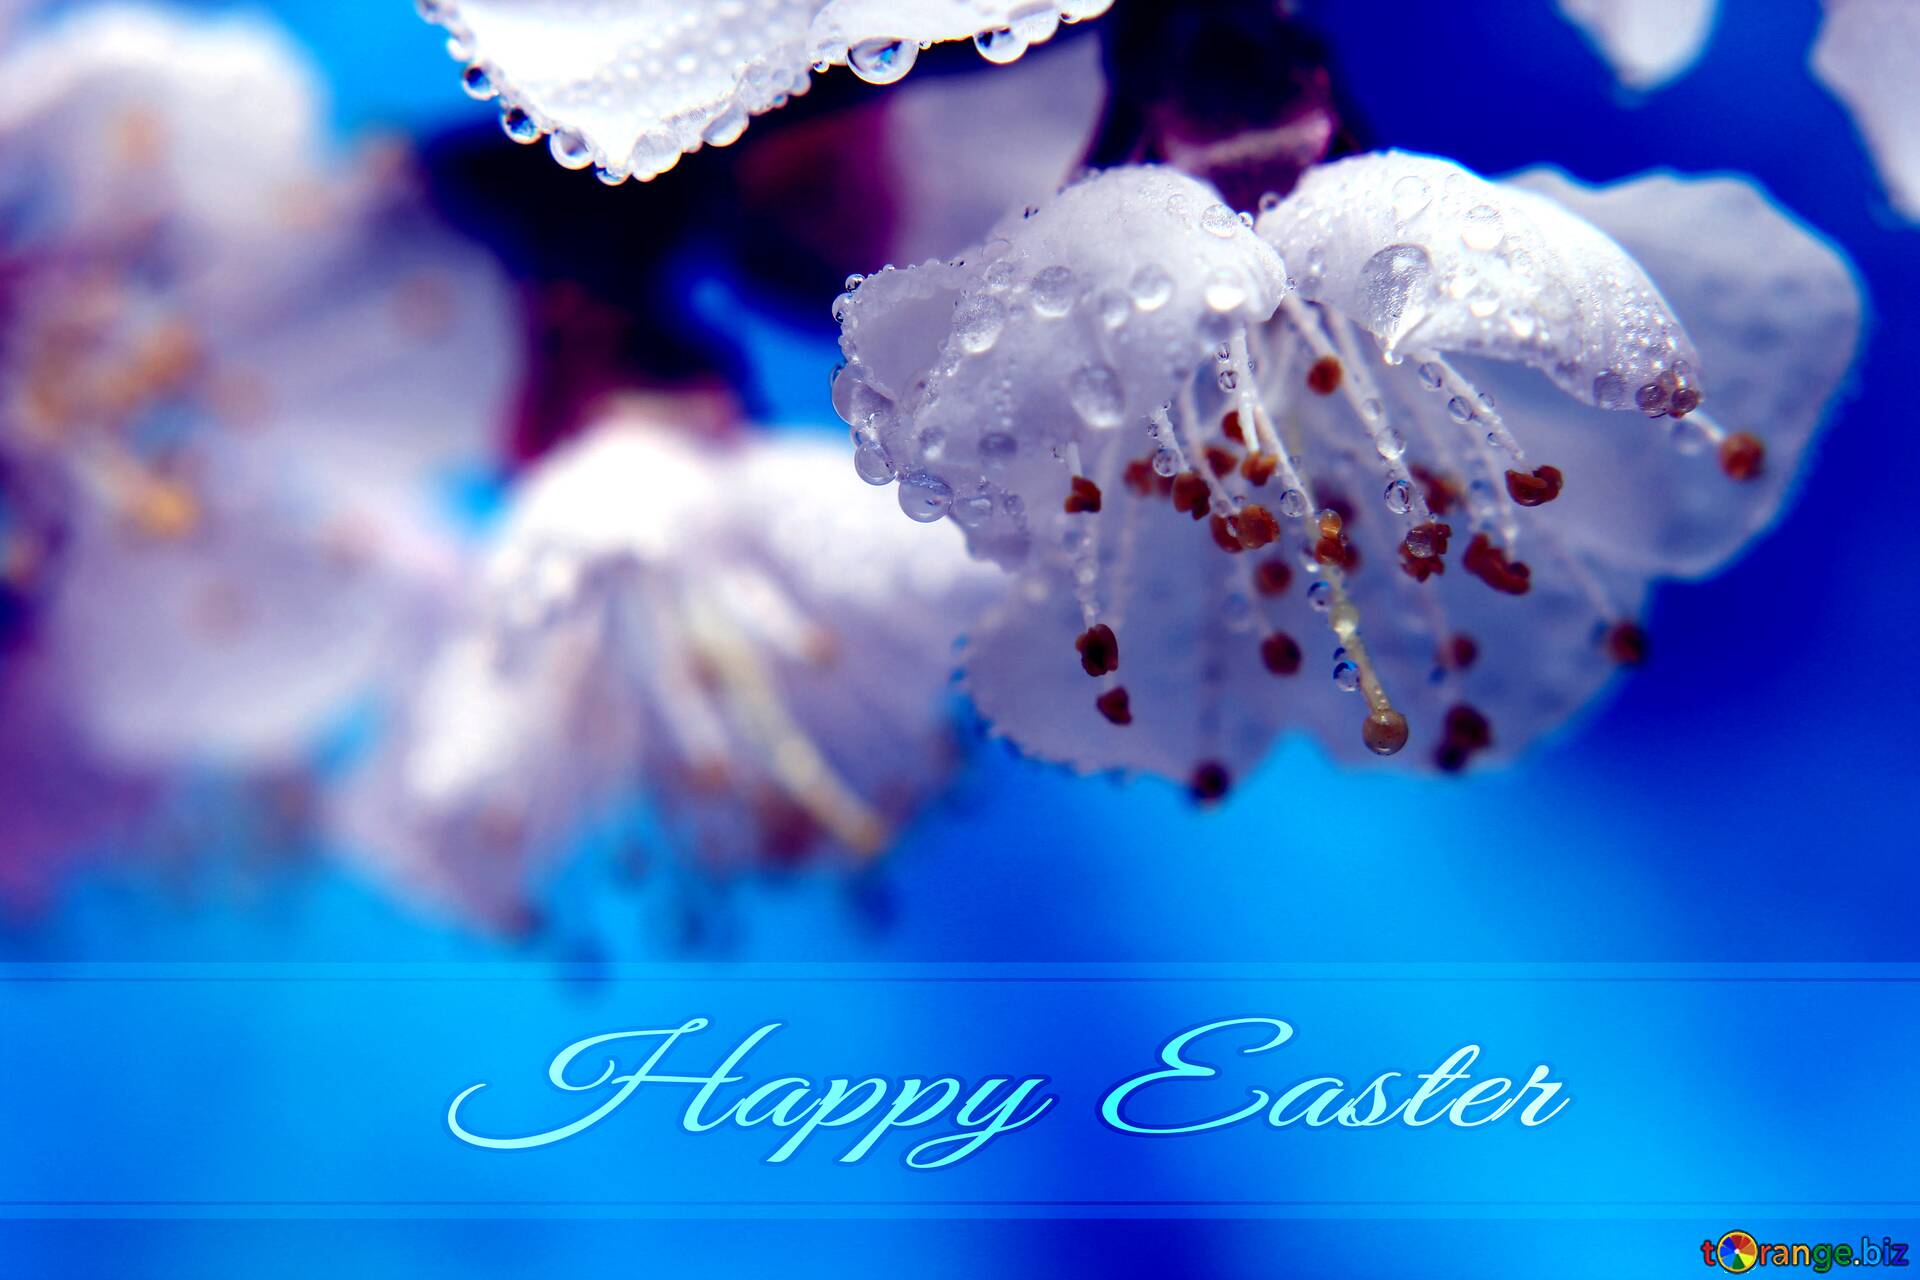 Download Free Picture Spring Wallpaper For Desktop Blue Card With Inscription Happy Easter On CC BY License Free Image Stock TOrange.biz Fx №169593